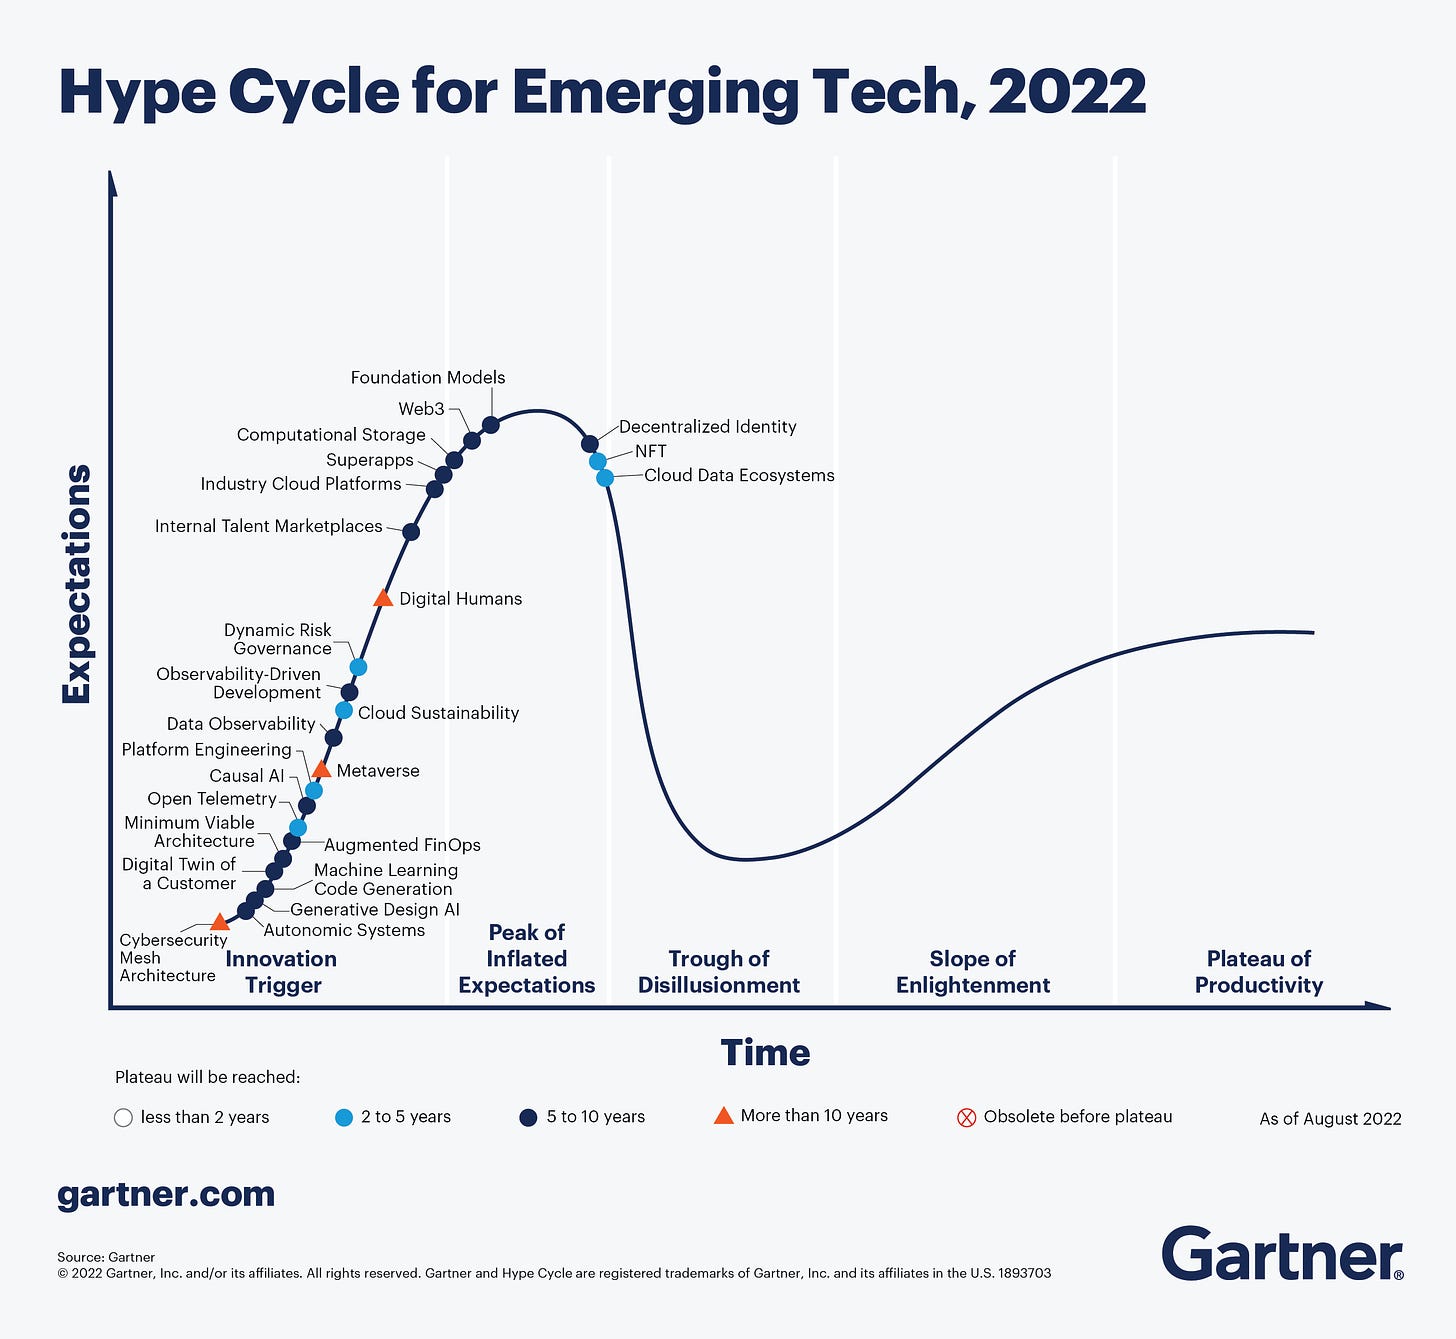 3 Exciting New Trends in the Gartner Emerging Technologies Hype Cycle